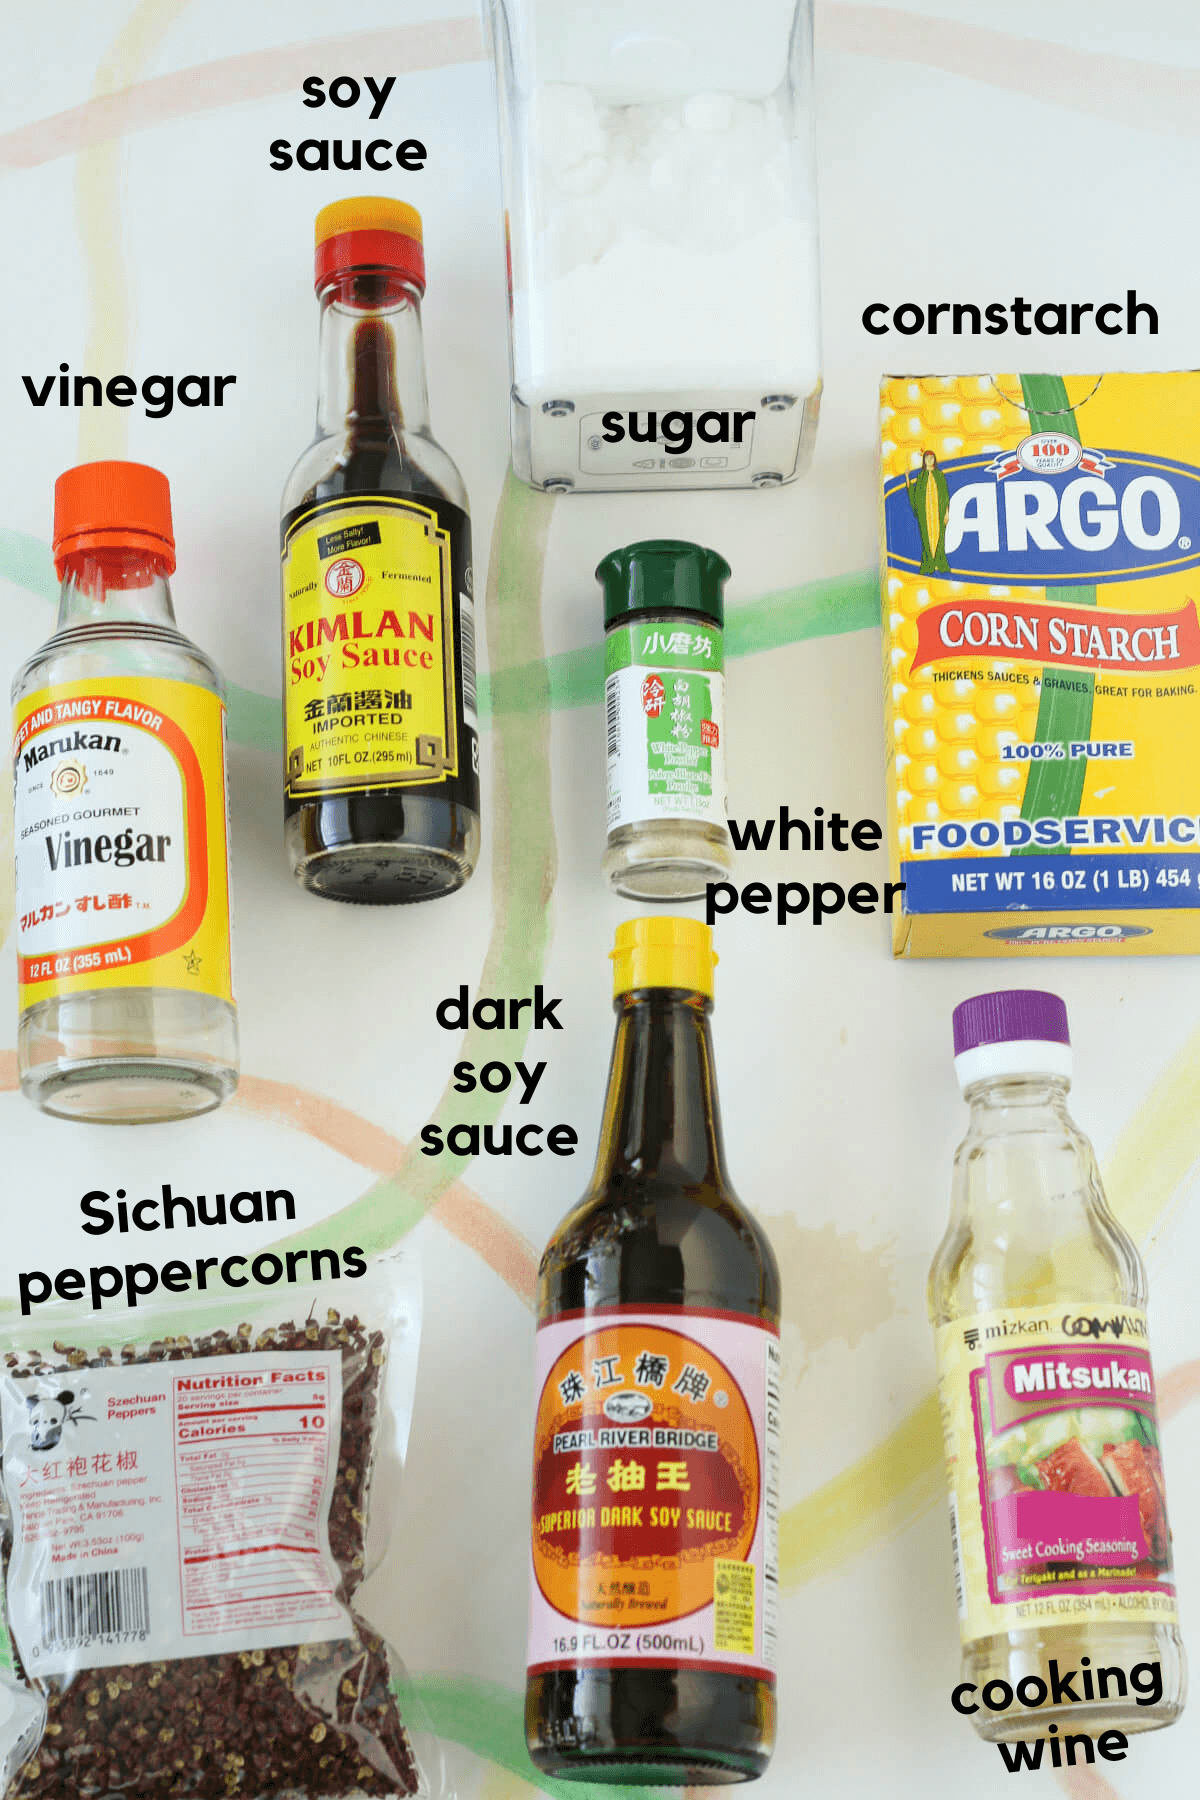 The rest of the ingredients for the kung pao paneer sauce, including vinegar, soy sauce, sugar, white pepper, cornstarch, cooking wine, dark soy sauce and Sichuan peppercorns.